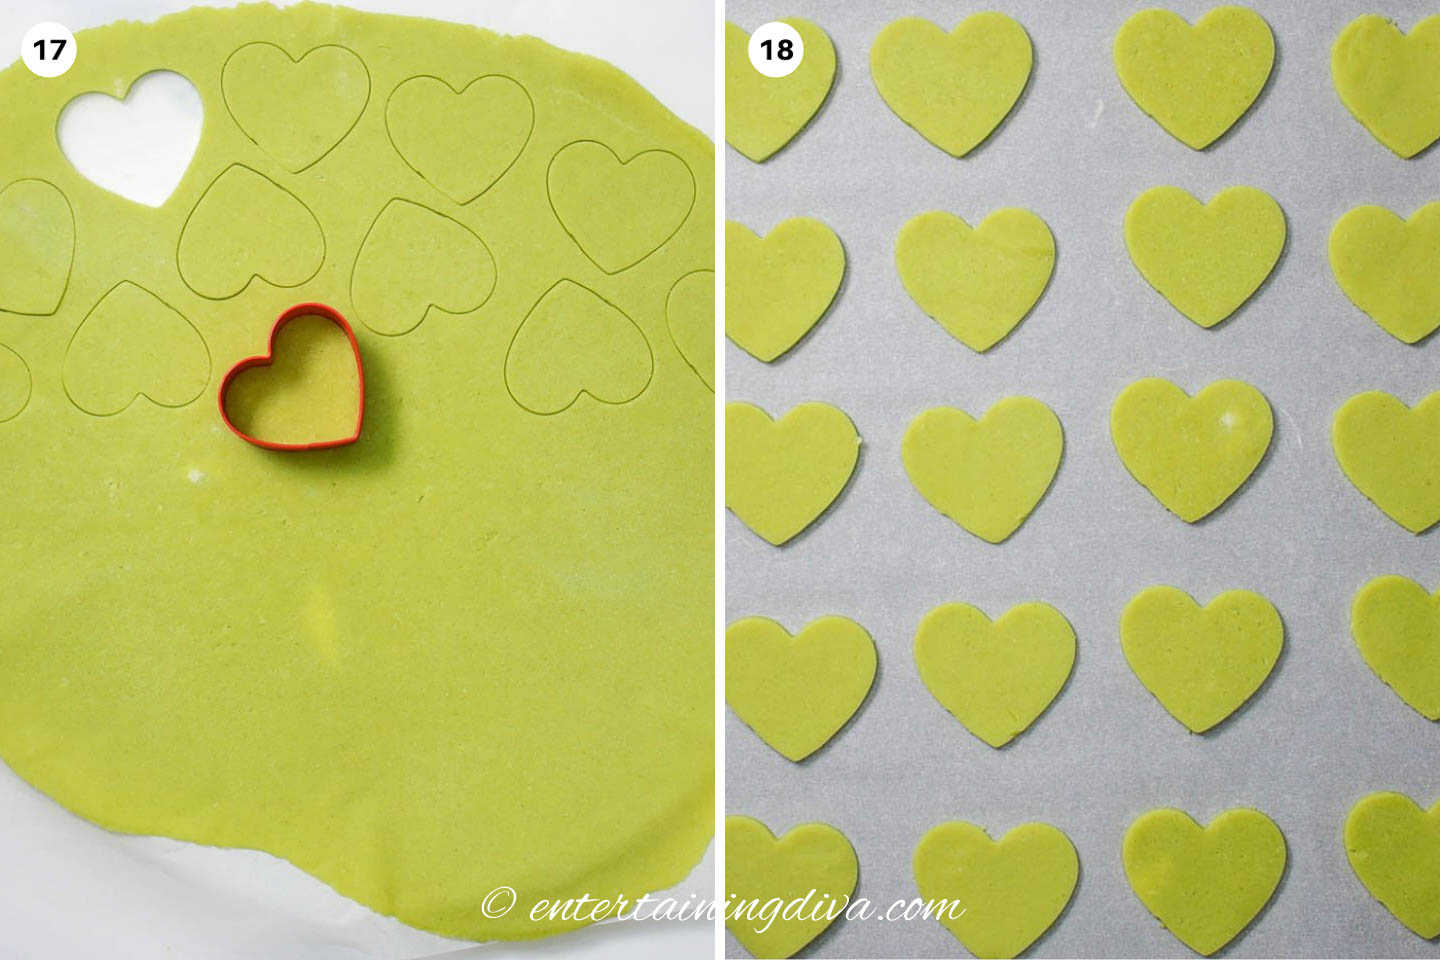 How to cut out hearts from the green cookie dough